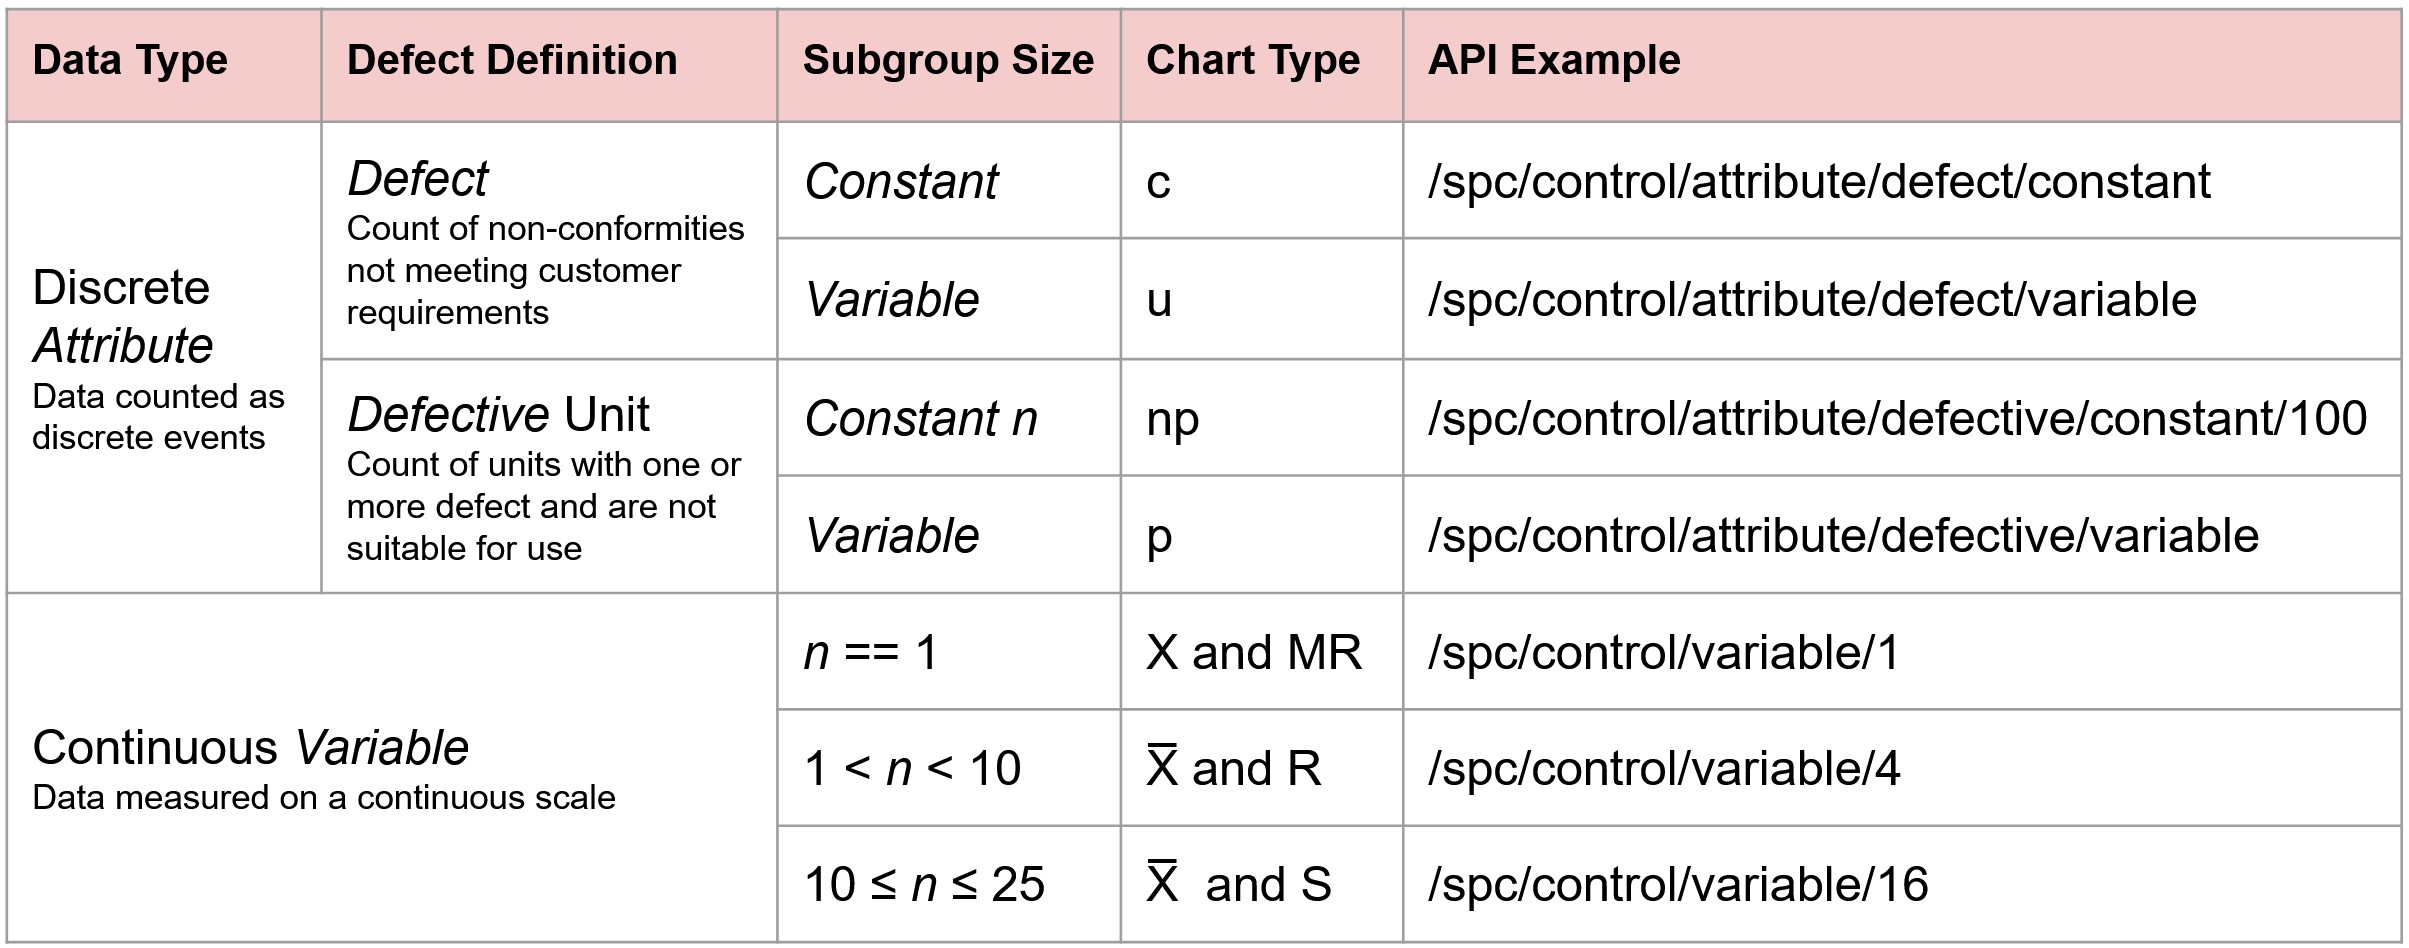 Statistical Process Control API endpoint for Control Charts by Exponential Industry